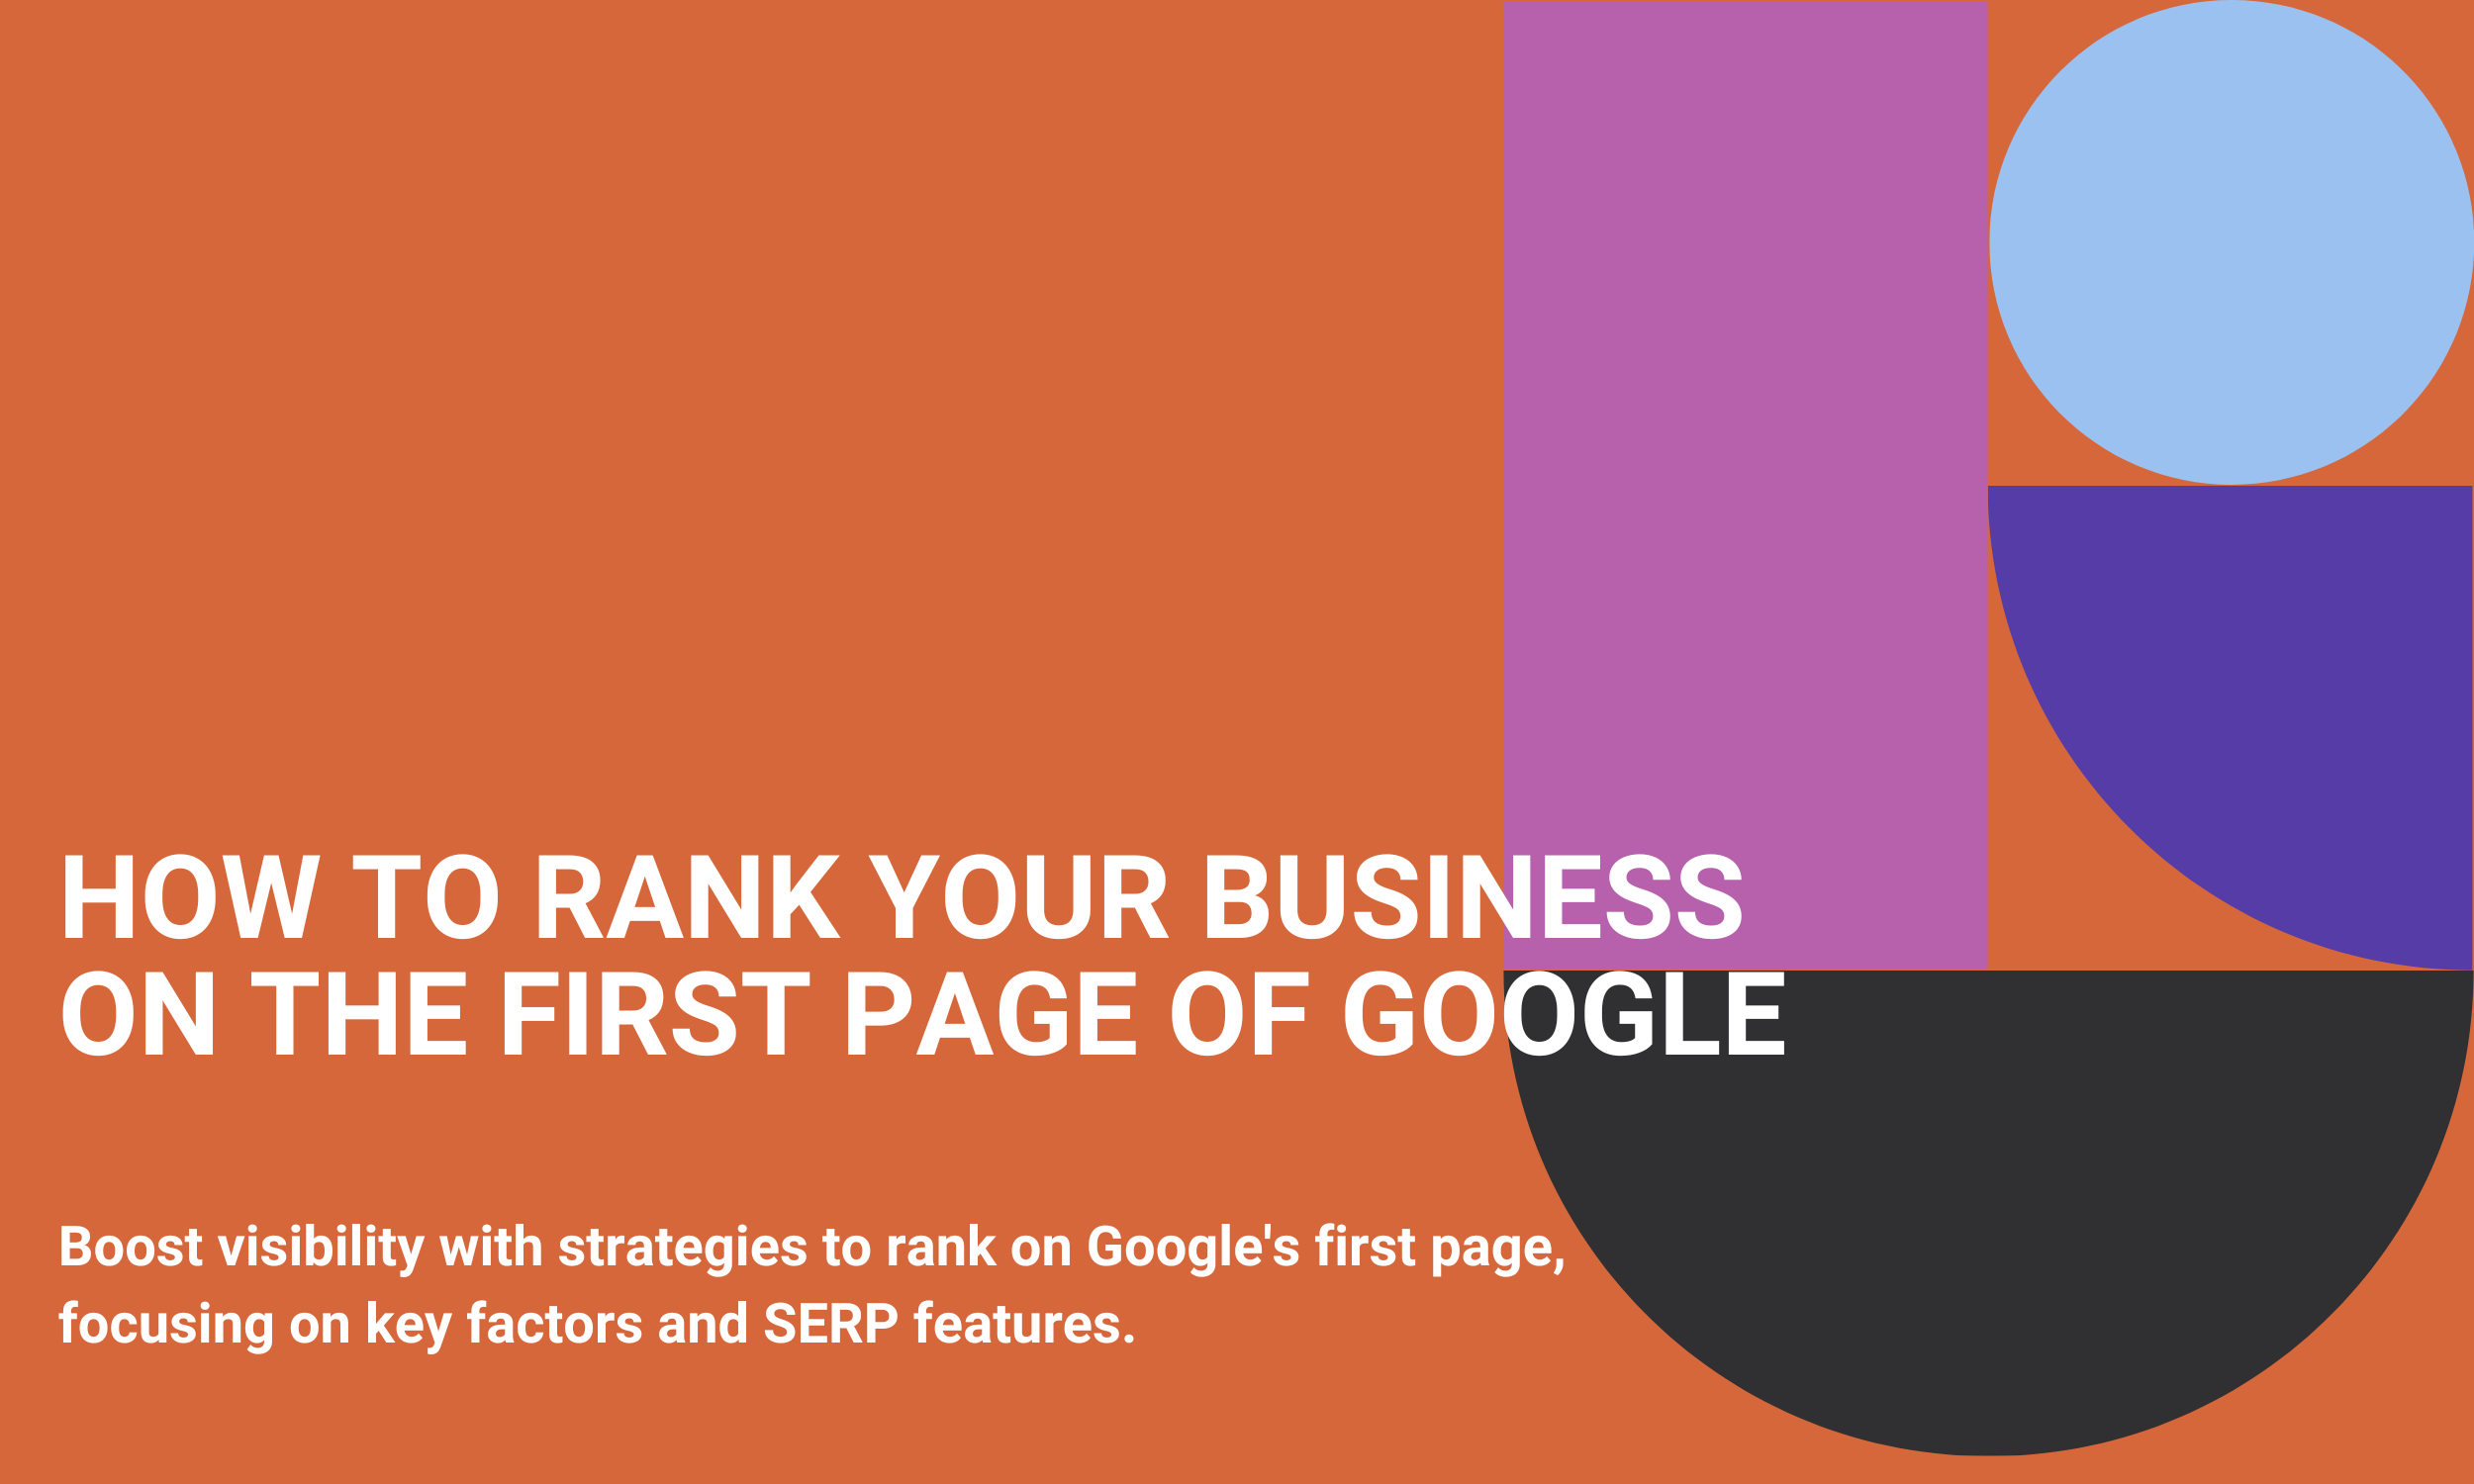 How To Rank Your Business On The First Page of Google